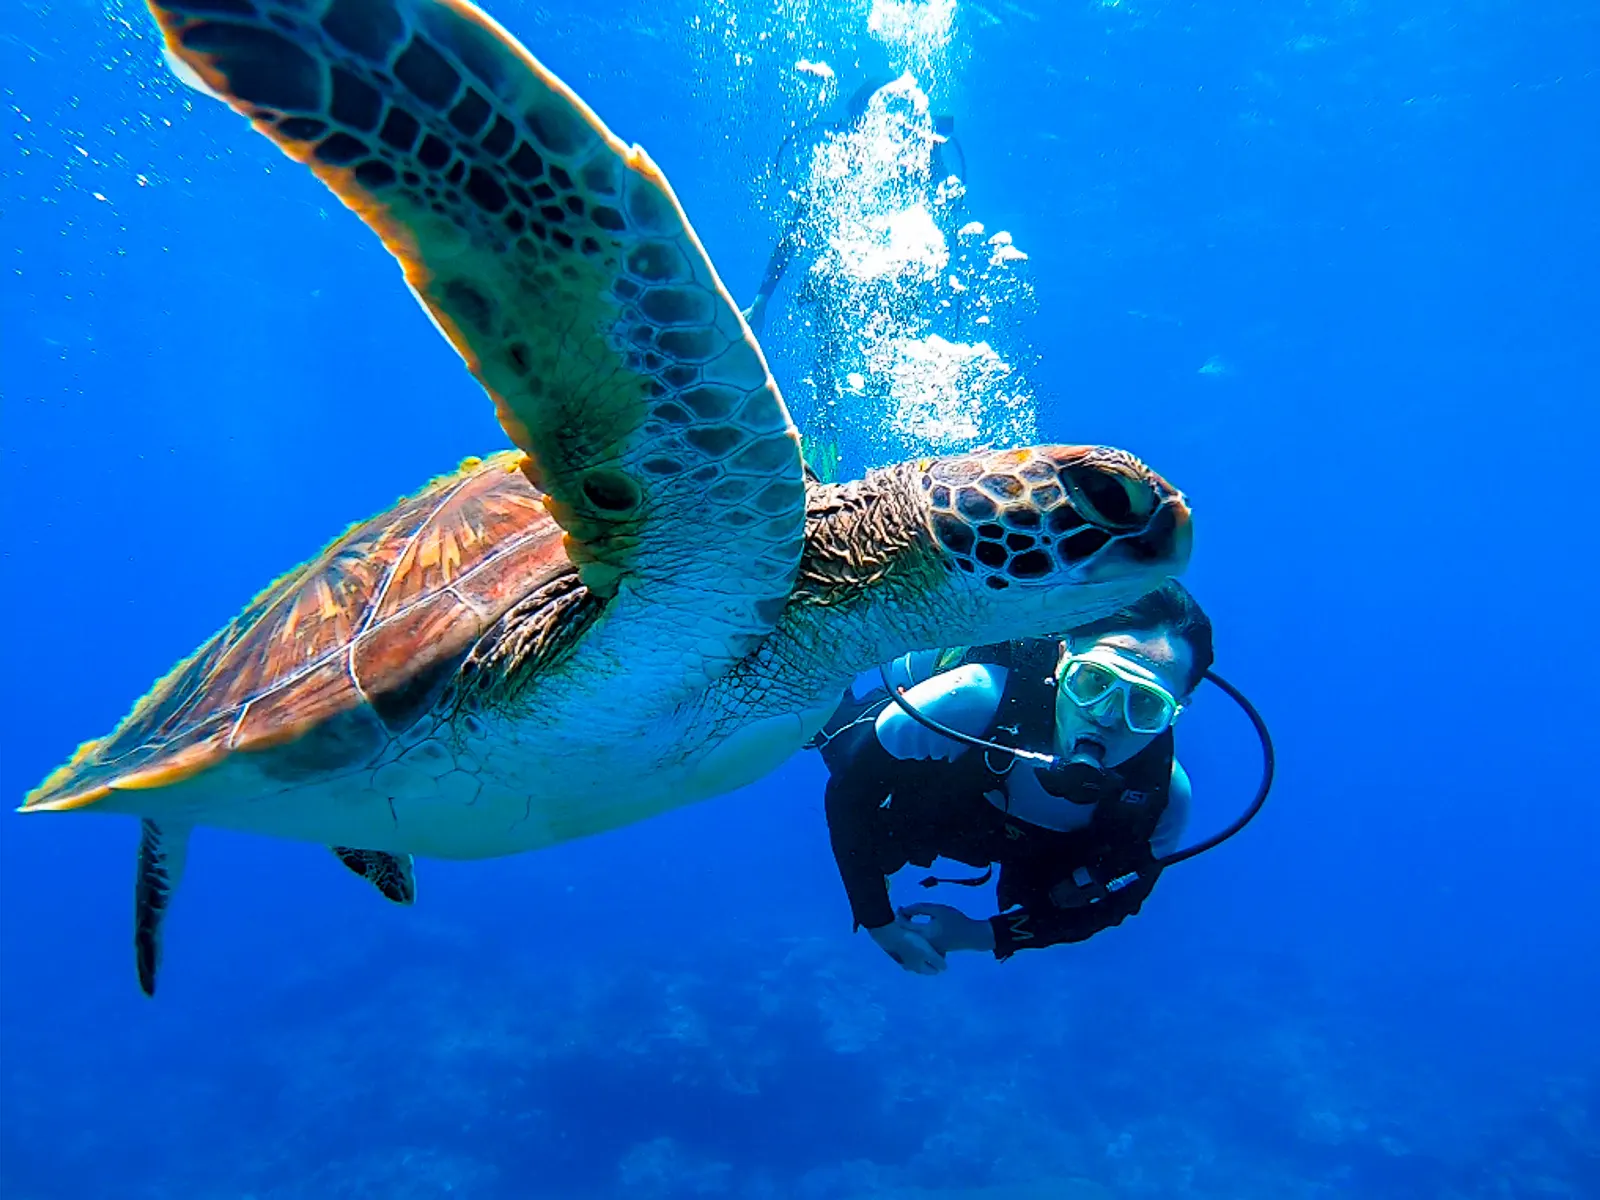 A diver swims near a sea turtle without touching it.